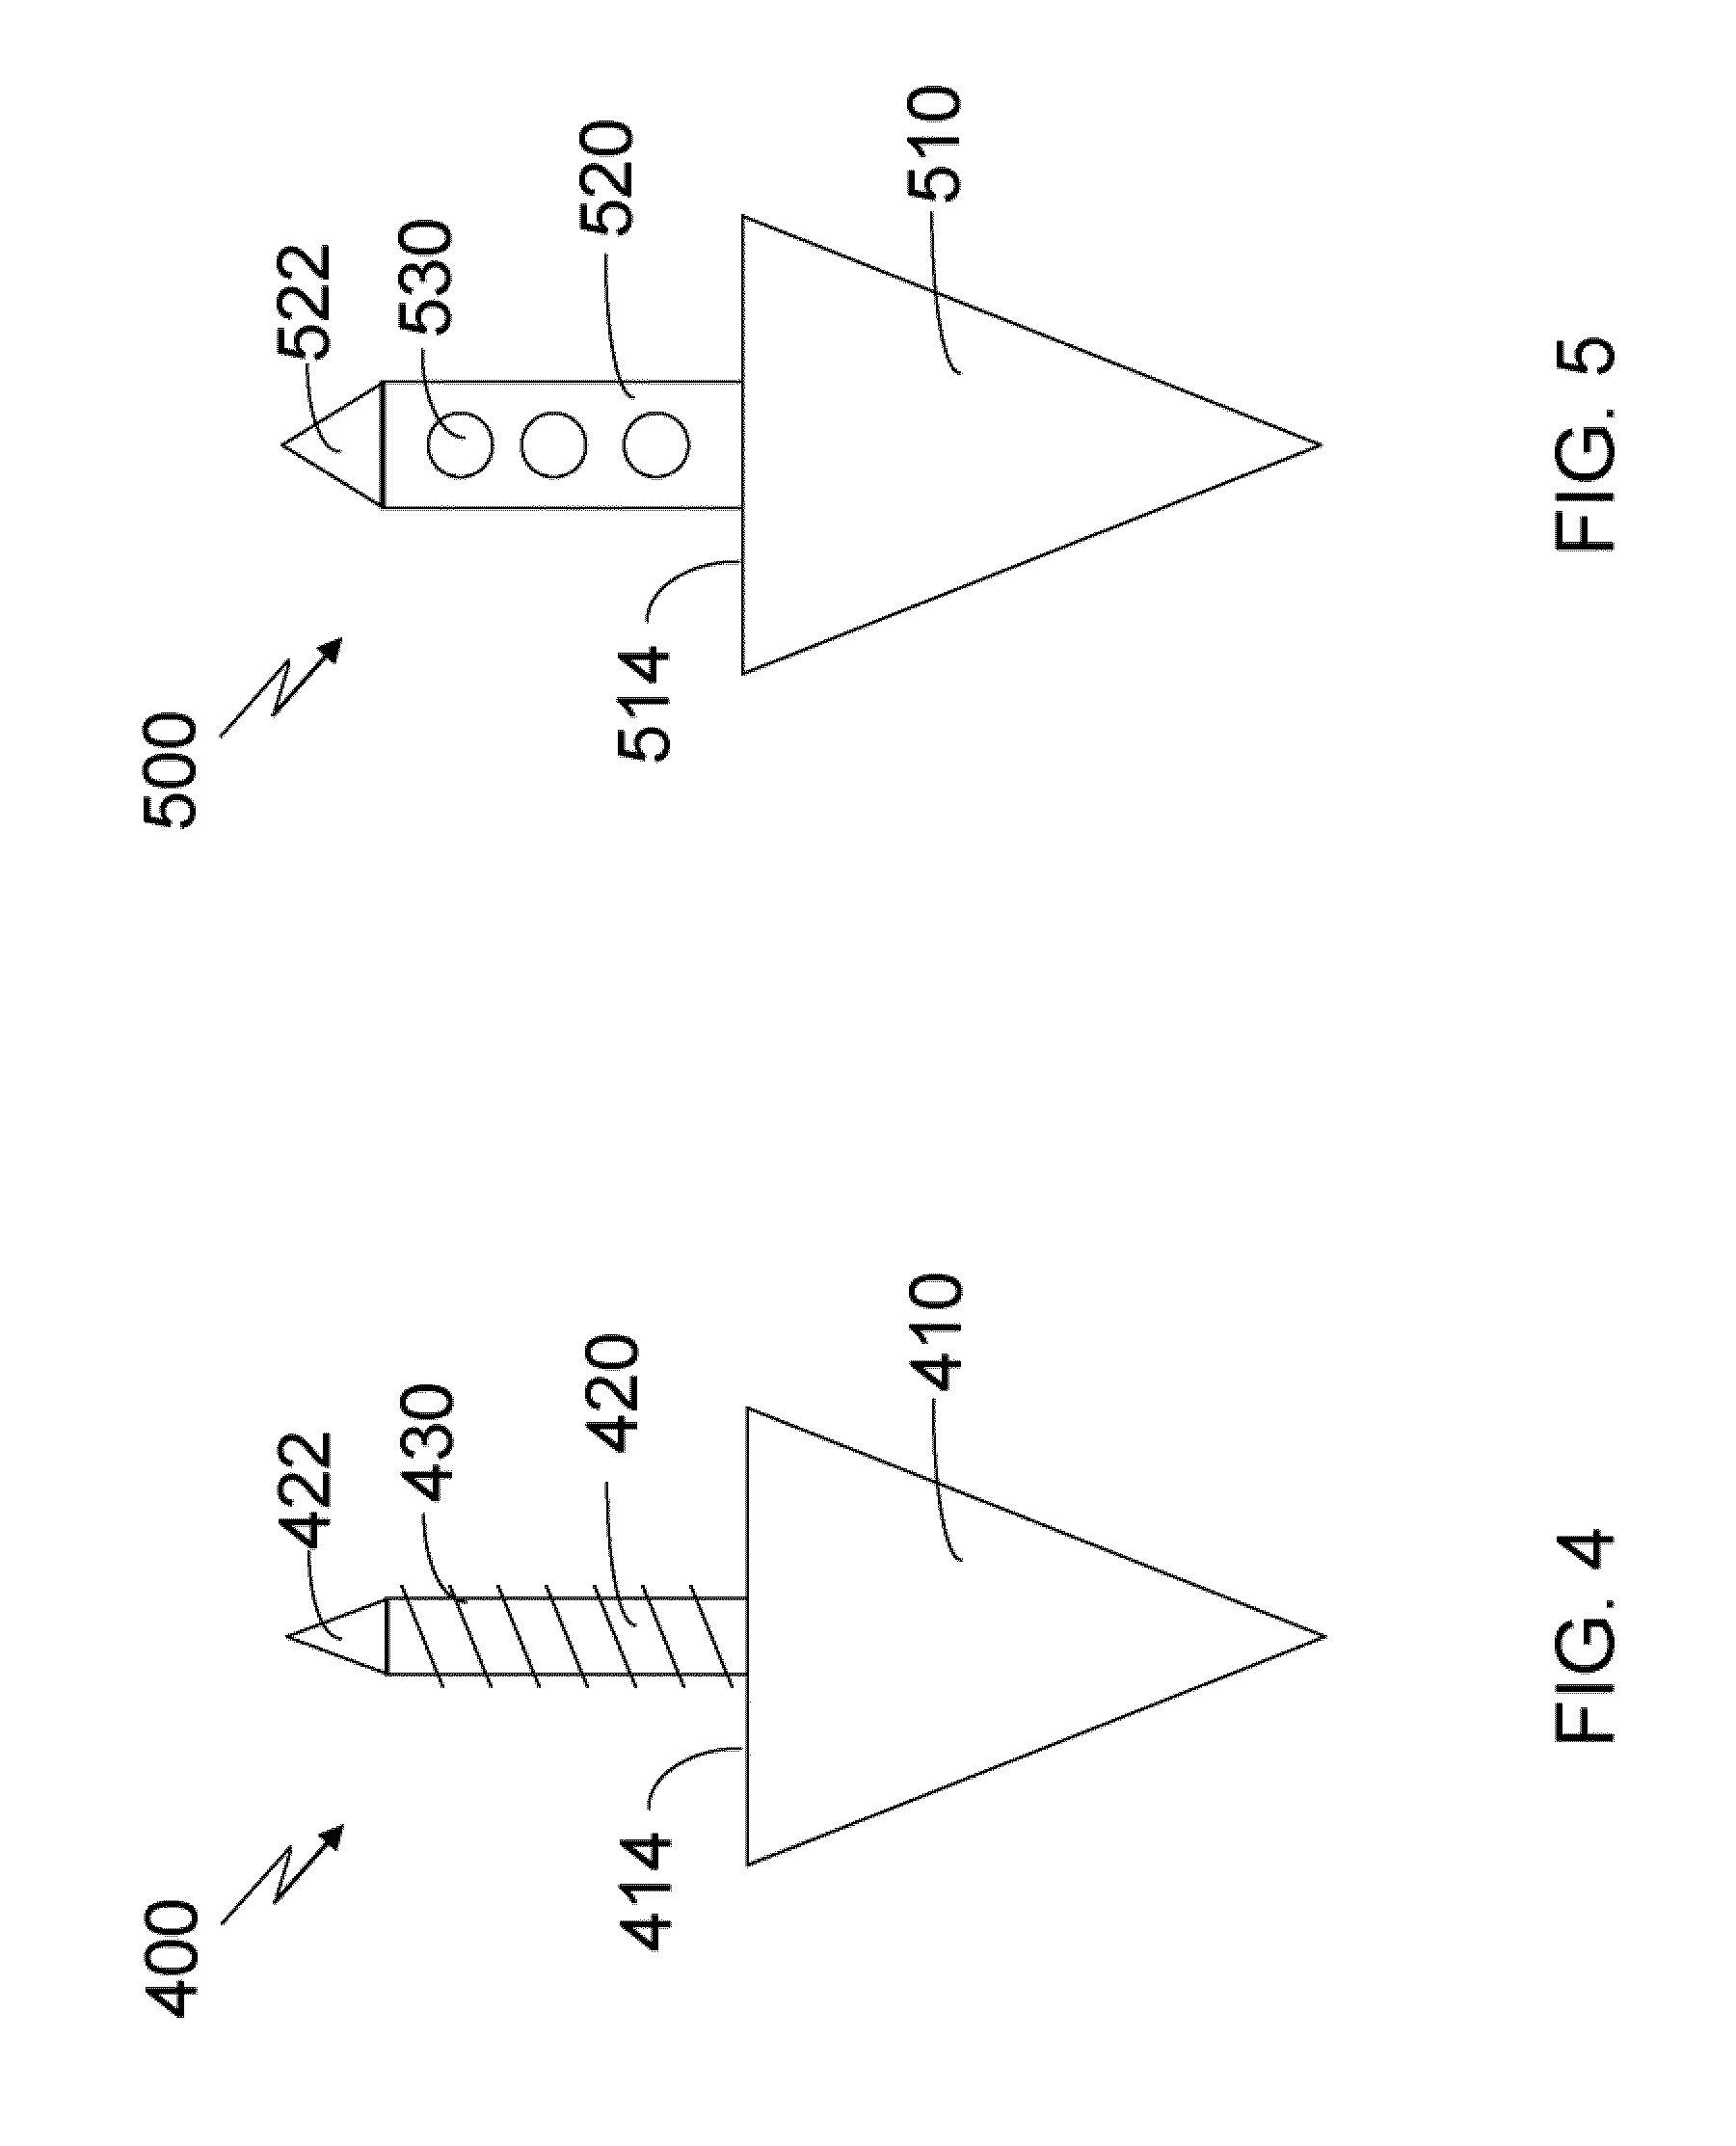 Implants and methods for performing gums and bone augmentation and preservation